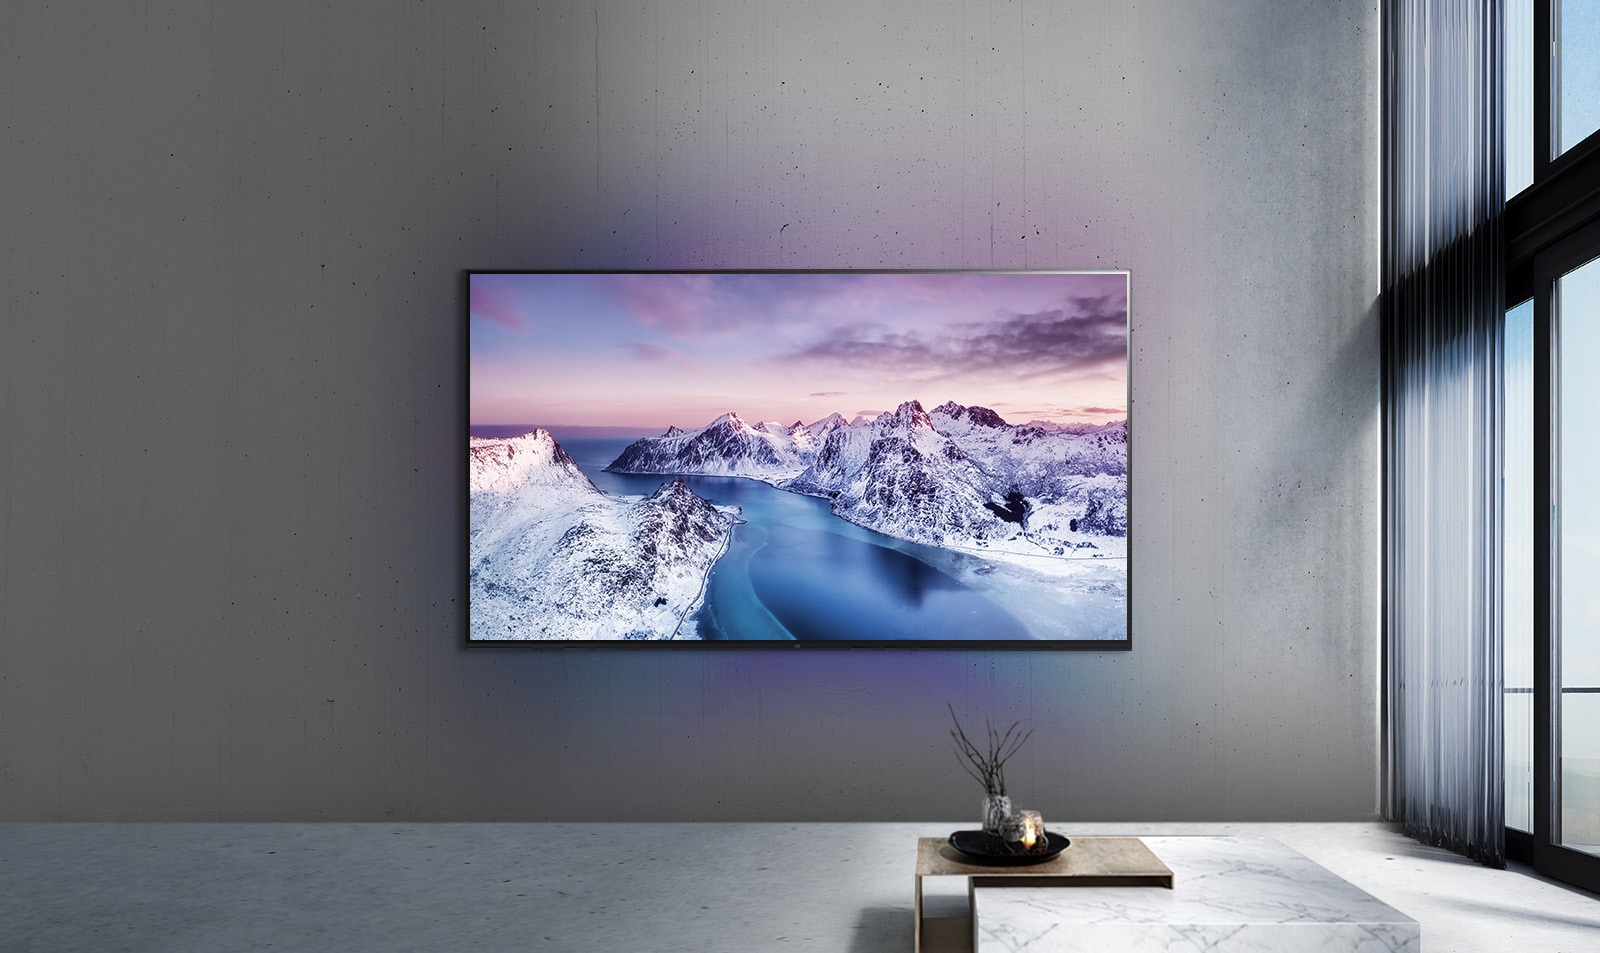 Lg 70 inch uhd 4k smart tv | Display and specs